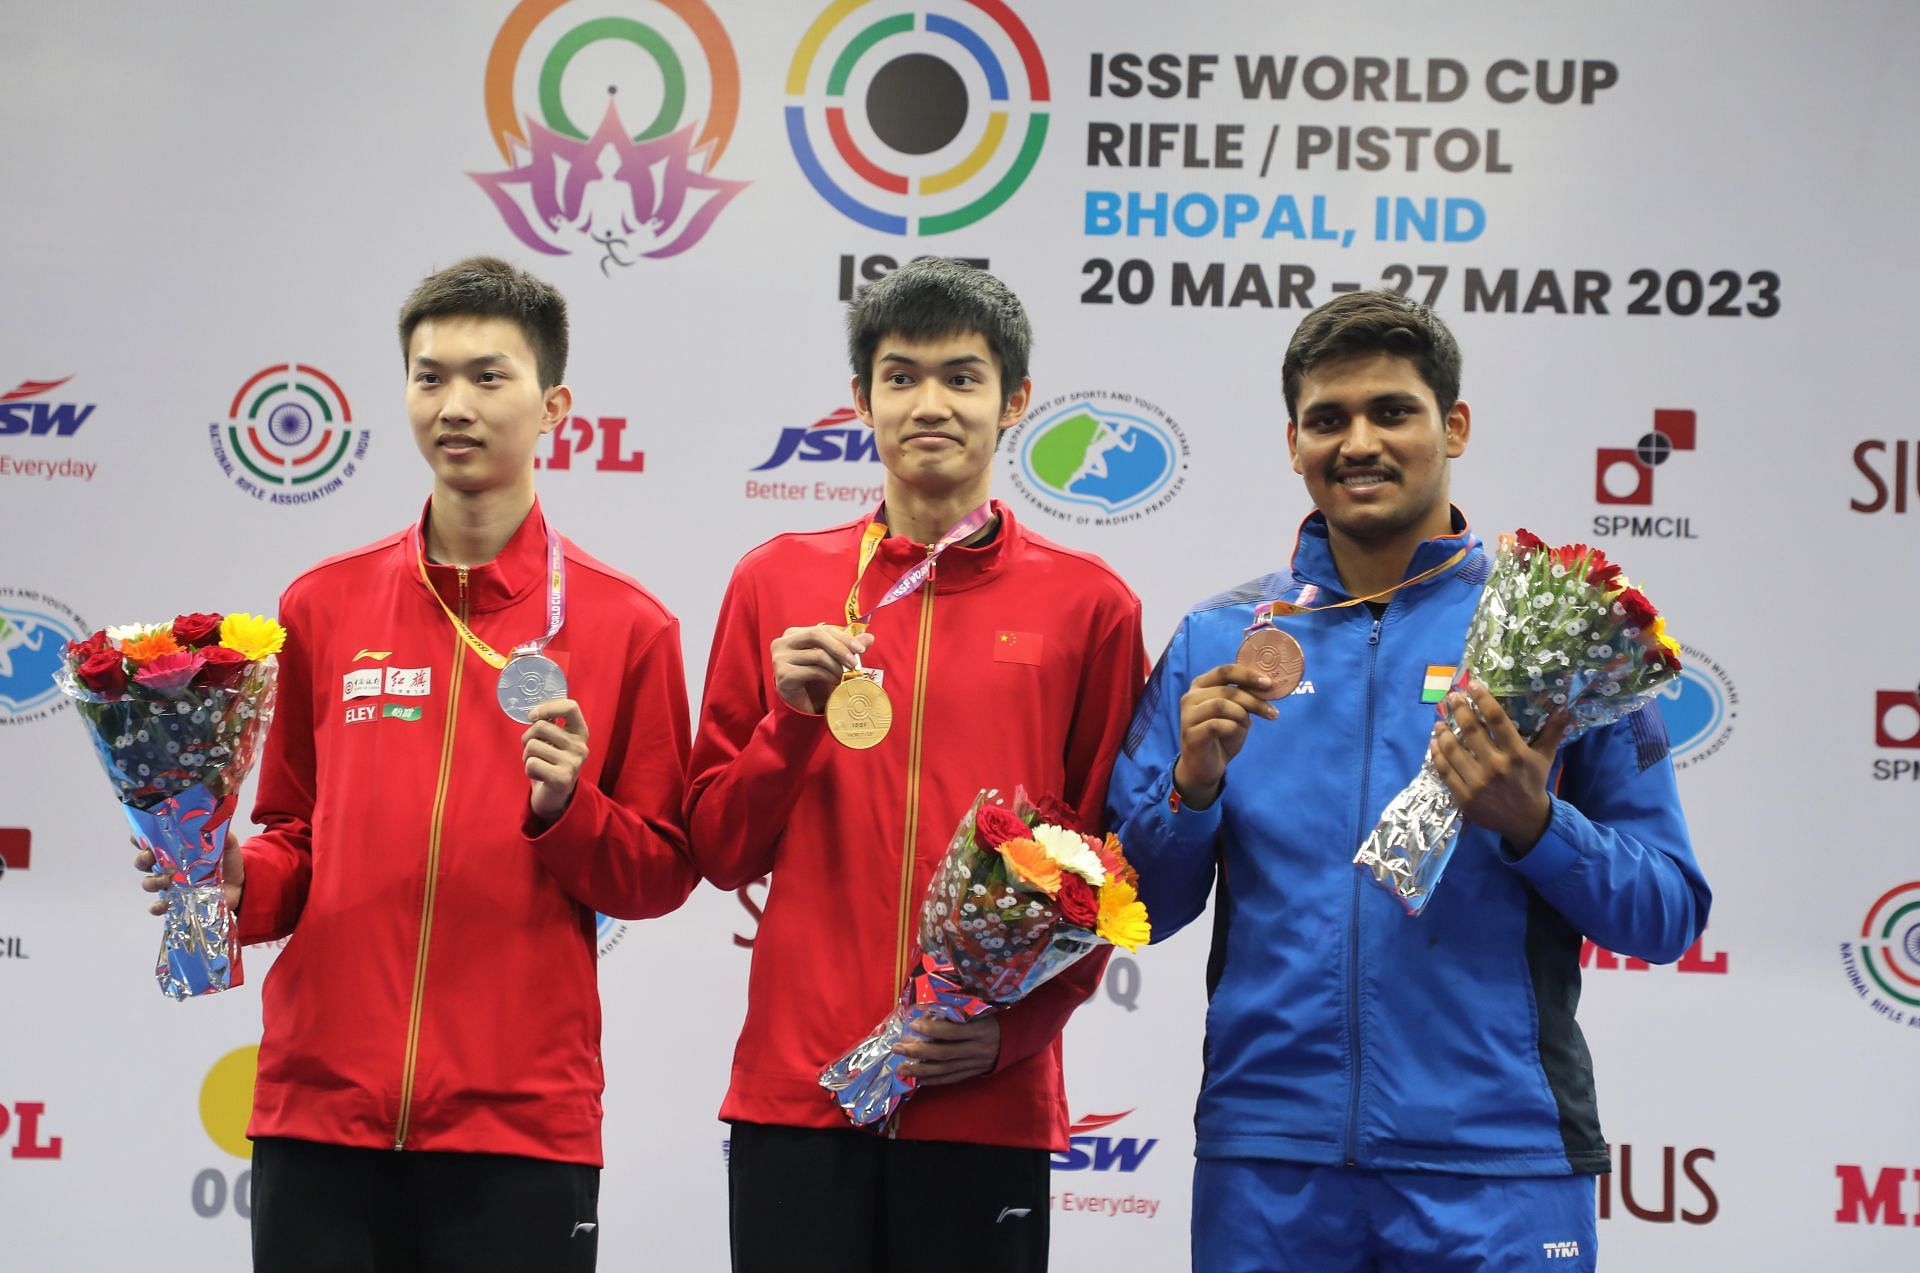 India&rsquo;s Rudrankksh Patil wins bronze in the men&rsquo;s 10m air rifle event at the ISSF World Cup in Bhopal on Friday. Photo credit ISSF